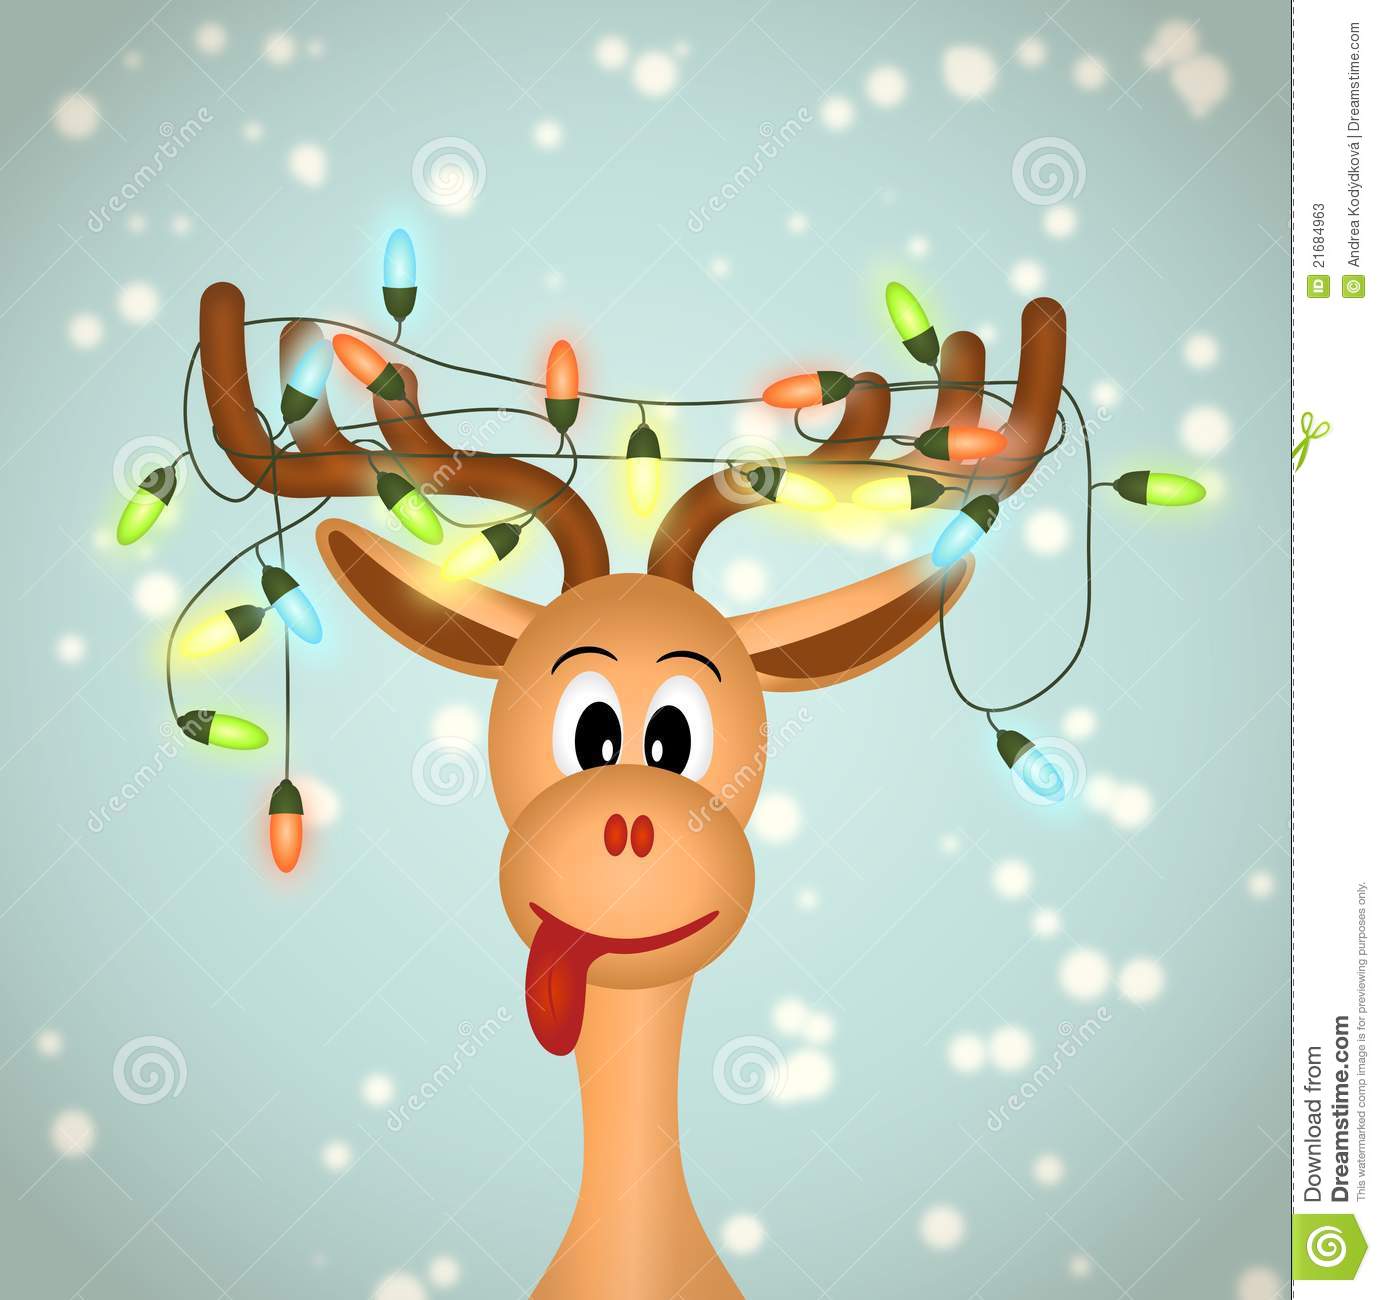 Funny Reindeer With Christmas Lights Tangled In Antlers   Illustration